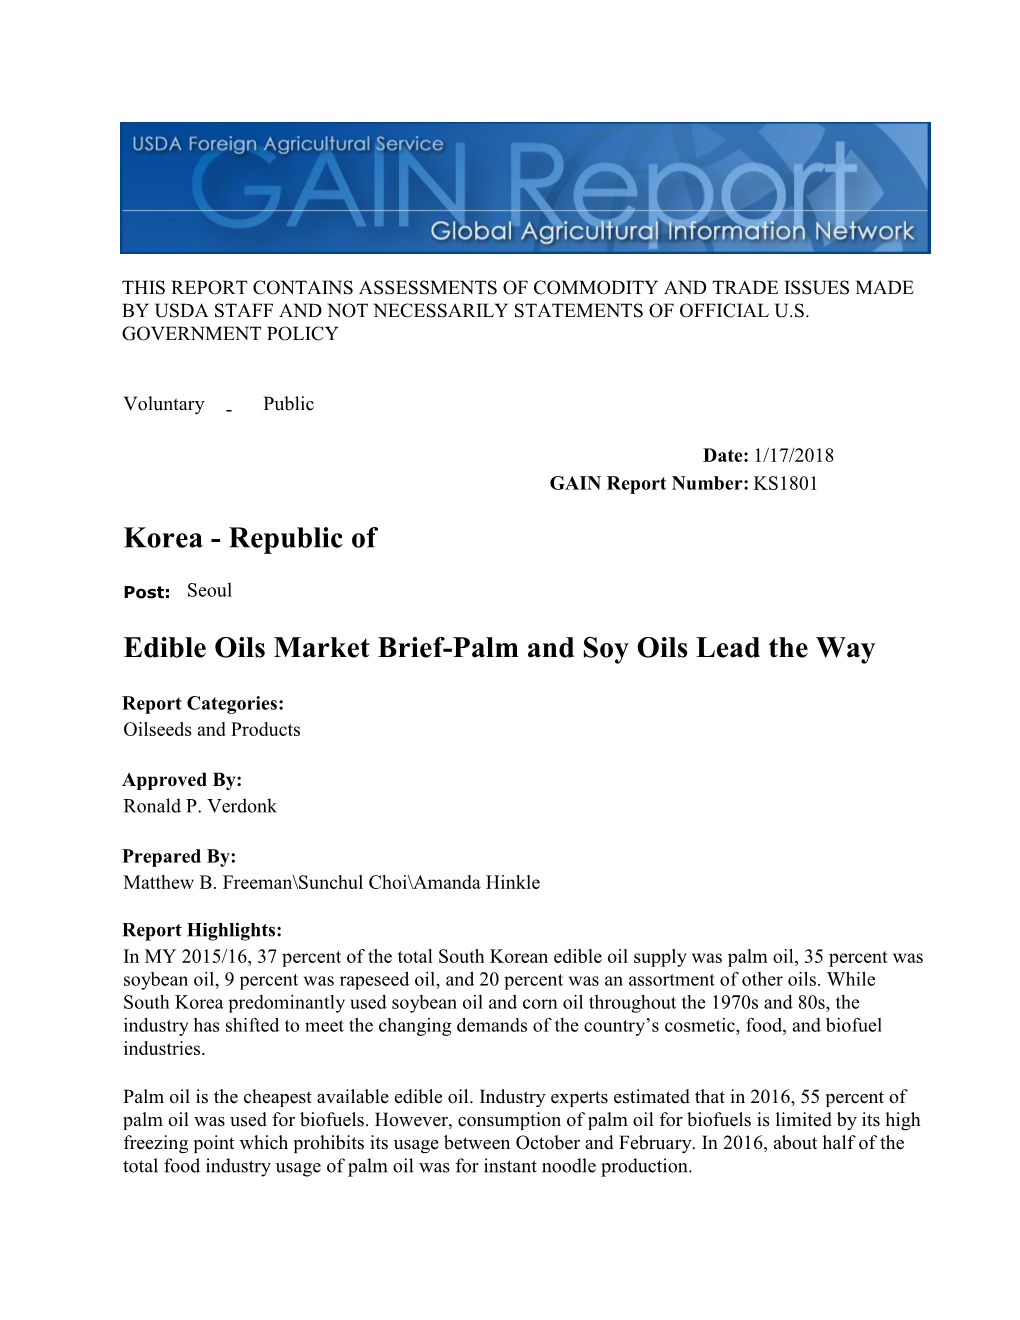 Edible Oils Market Brief-Palm and Soy Oils Lead the Way Korea